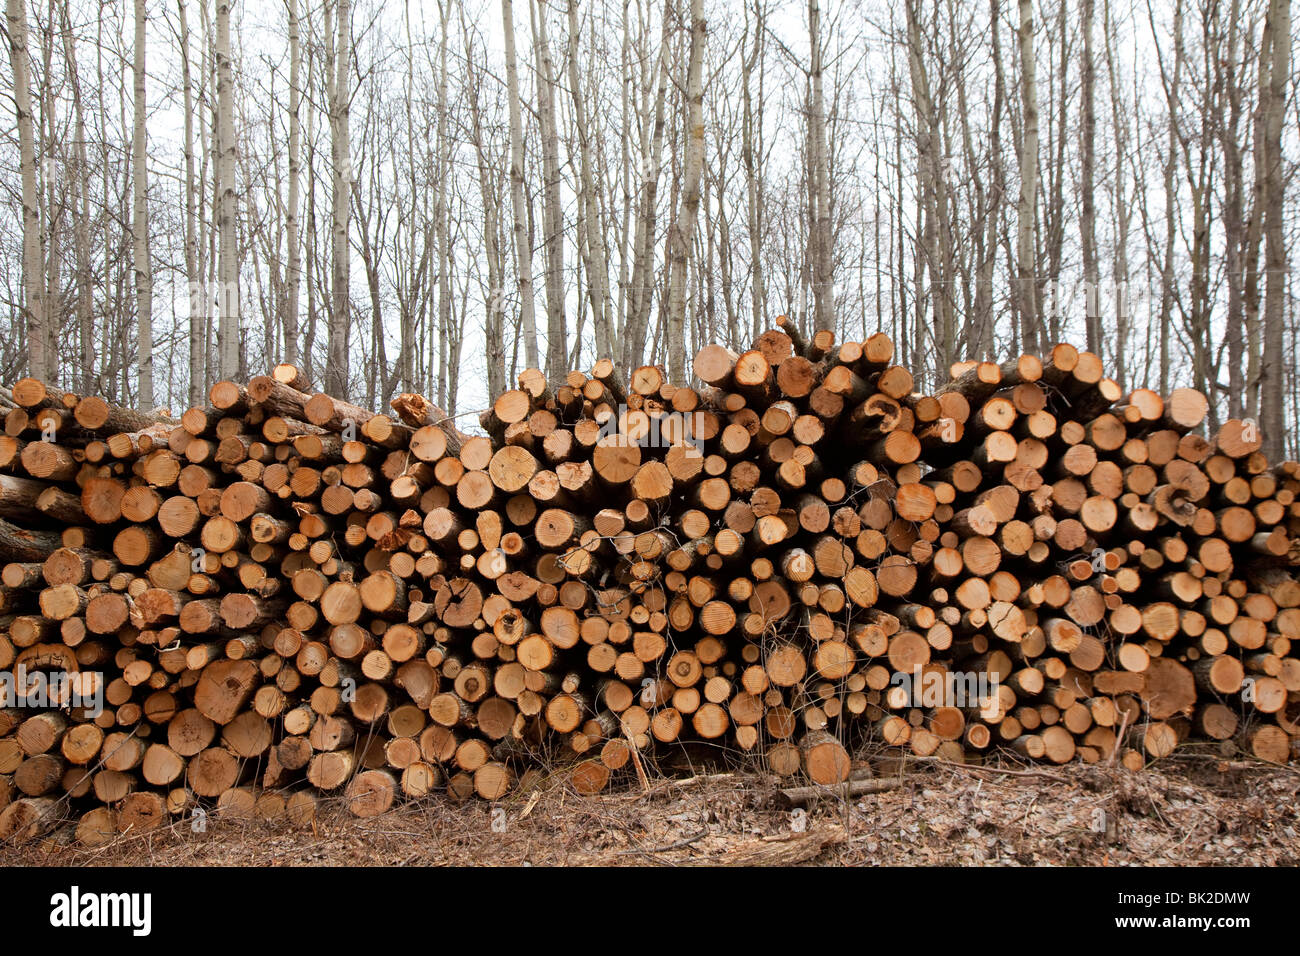 Hastings, Michigan - Wood stacked for pickup after logging in Michigan forest. Stock Photo